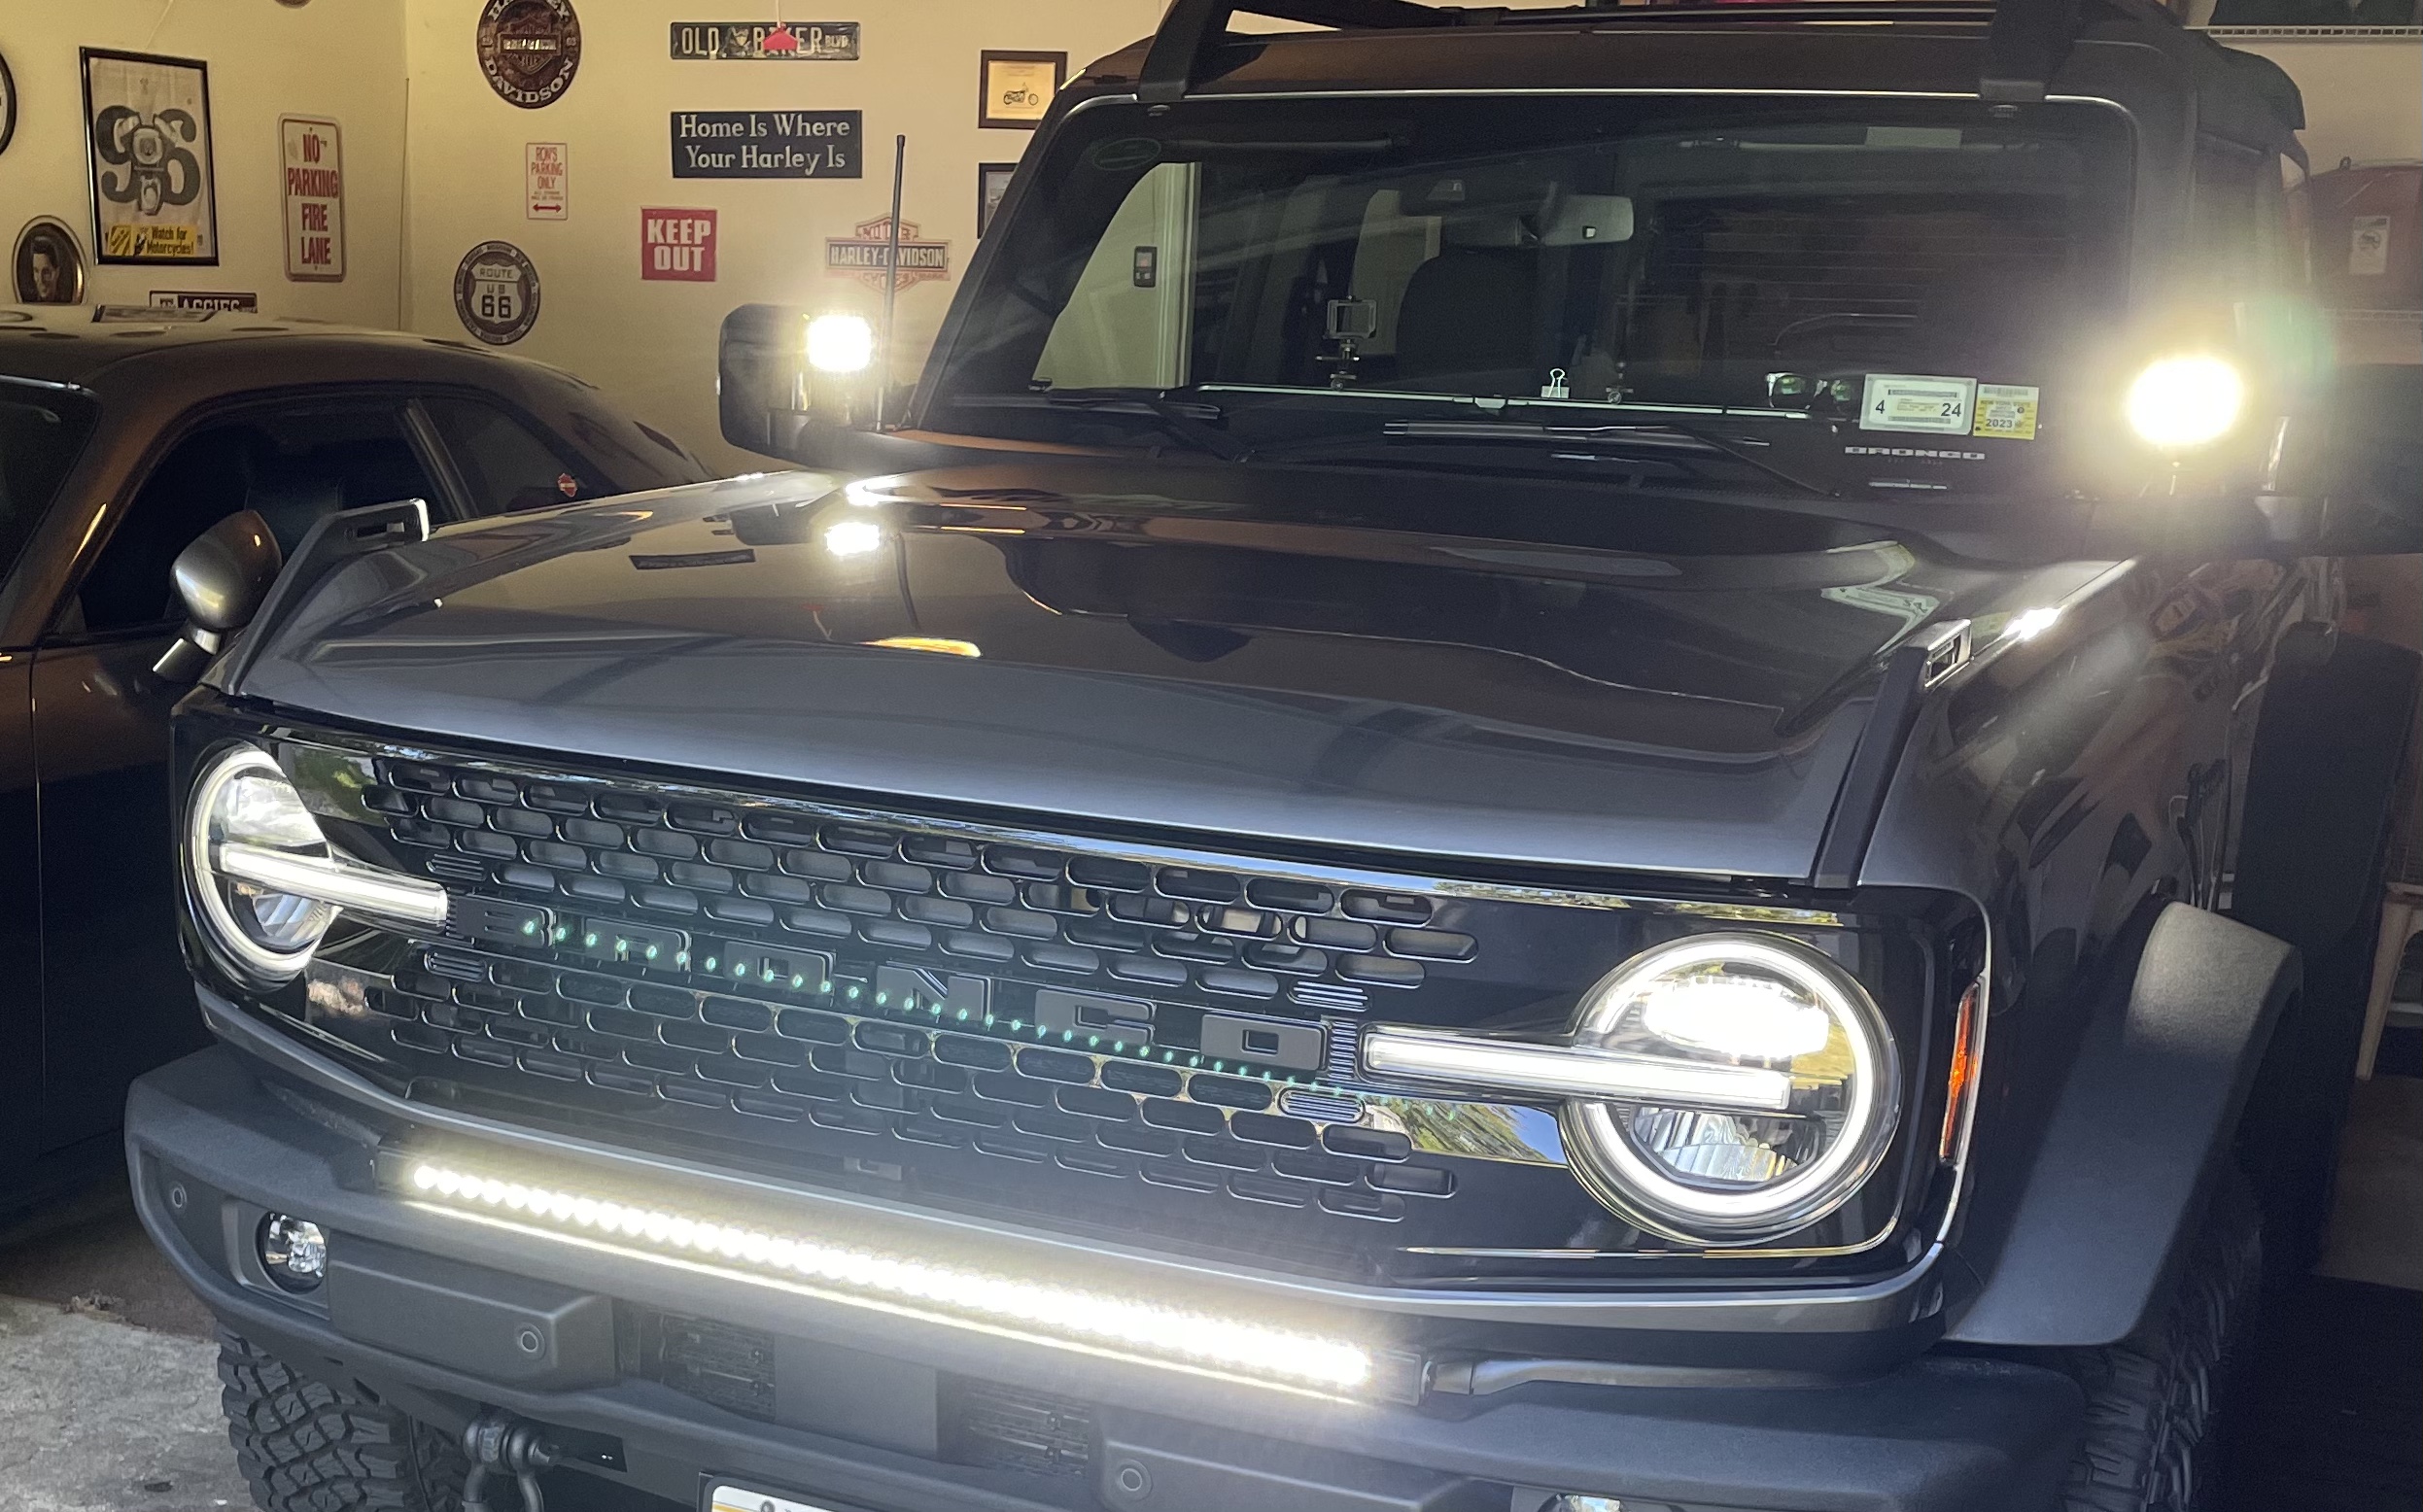 Ford Bronco Have a name / nickname for your Bronco? FrontLightBar